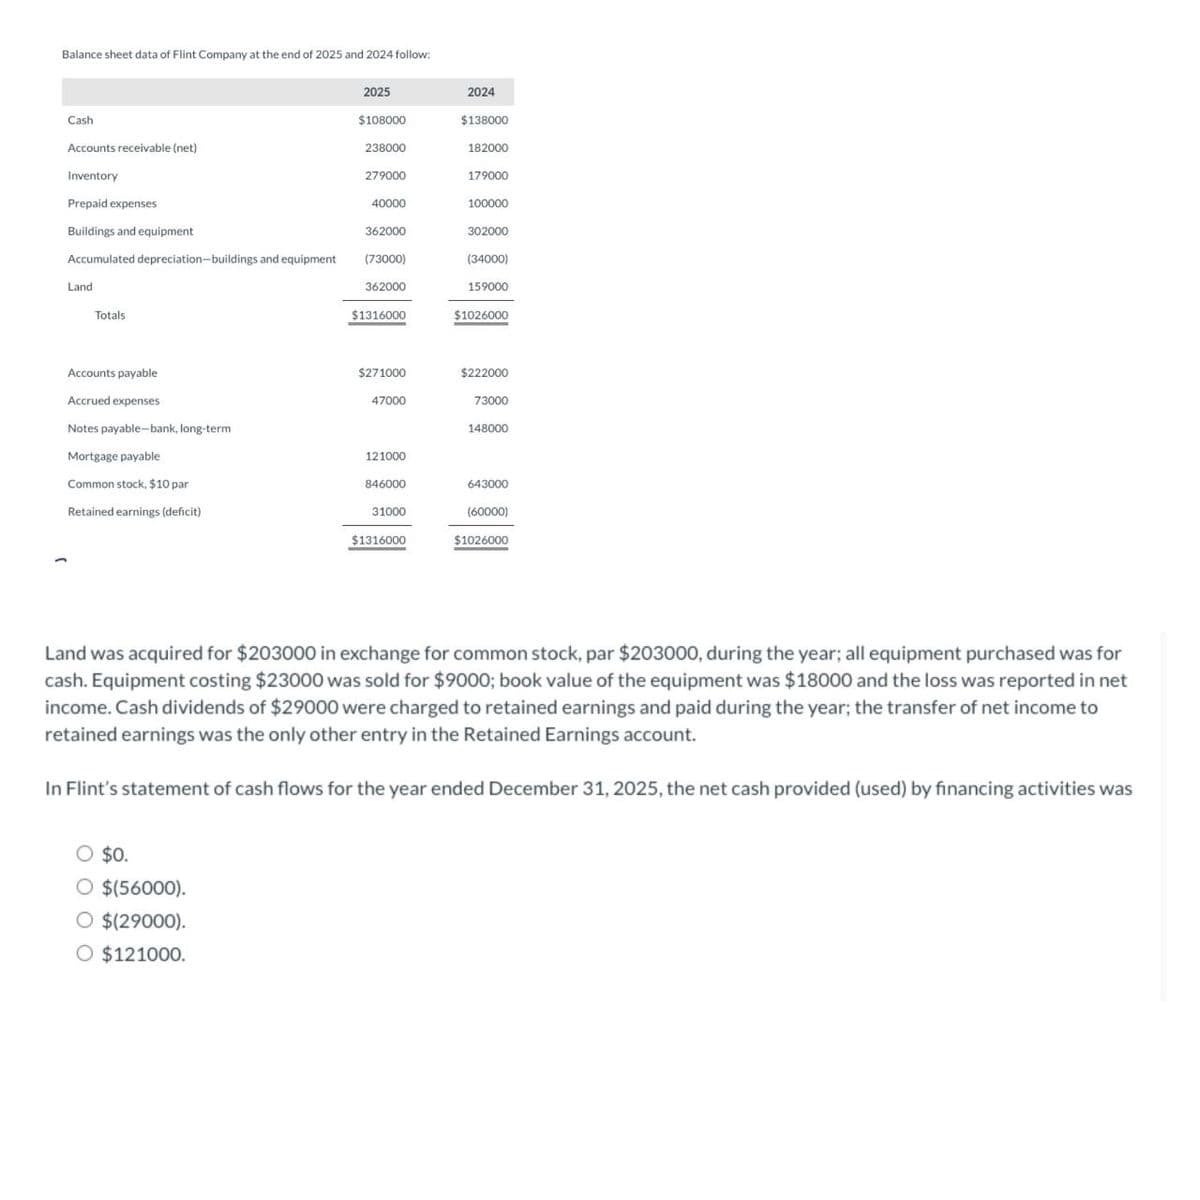 Balance sheet data of Flint Company at the end of 2025 and 2024 follow:
Cash
Accounts receivable (net)
Inventory
Prepaid expenses
Buildings and equipment
Accumulated depreciation-buildings and equipment
Land
Totals
Accounts payable
Accrued expenses
Notes payable-bank, long-term
Mortgage payable
Common stock, $10 par
Retained earnings (deficit)
2025
O $0.
O $(56000).
O $(29000).
O $121000.
$108000
238000
279000
40000
362000
(73000)
362000
$1316000
$271000
47000
121000
846000
31000
$1316000
2024
$138000
182000
179000
100000
302000
(34000)
159000
$1026000
$222000
73000
148000
643000
(60000)
$1026000
Land was acquired for $203000 in exchange for common stock, par $203000, during the year; all equipment purchased was for
cash. Equipment costing $23000 was sold for $9000; book value of the equipment was $18000 and the loss was reported in net
income. Cash dividends of $29000 were charged to retained earnings and paid during the year; the transfer of net income to
retained earnings was the only other entry in the Retained Earnings account.
In Flint's statement of cash flows for the year ended December 31, 2025, the net cash provided (used) by financing activities was